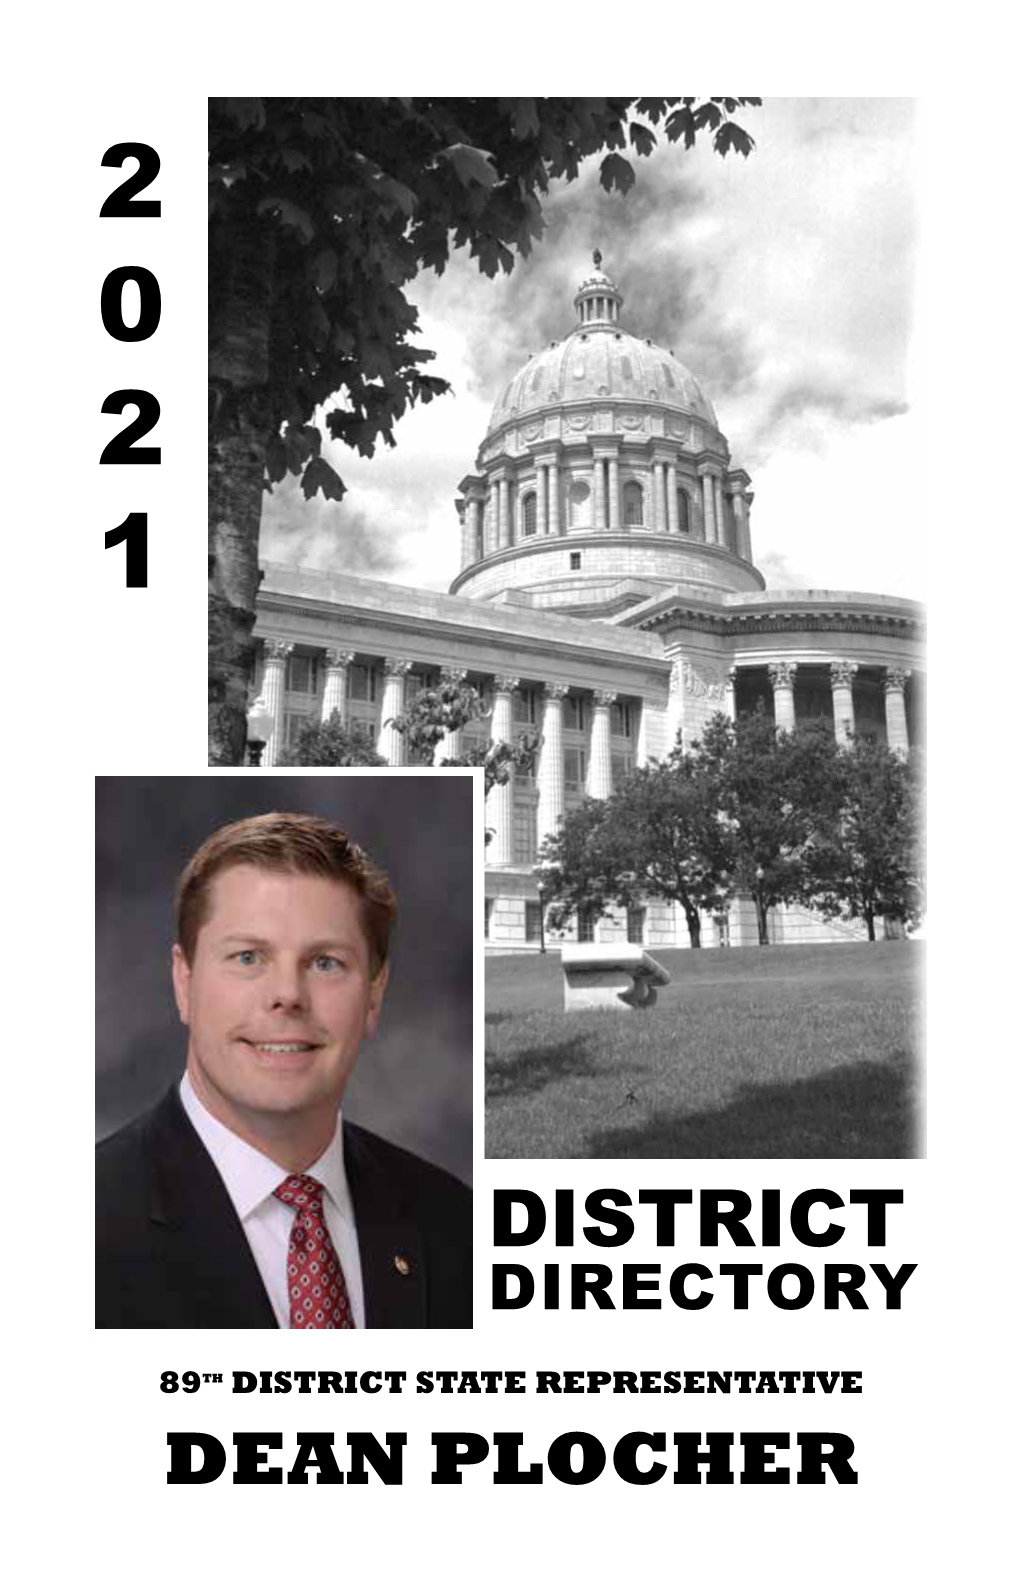 District Publicationpdf Or Other Document Produced by The